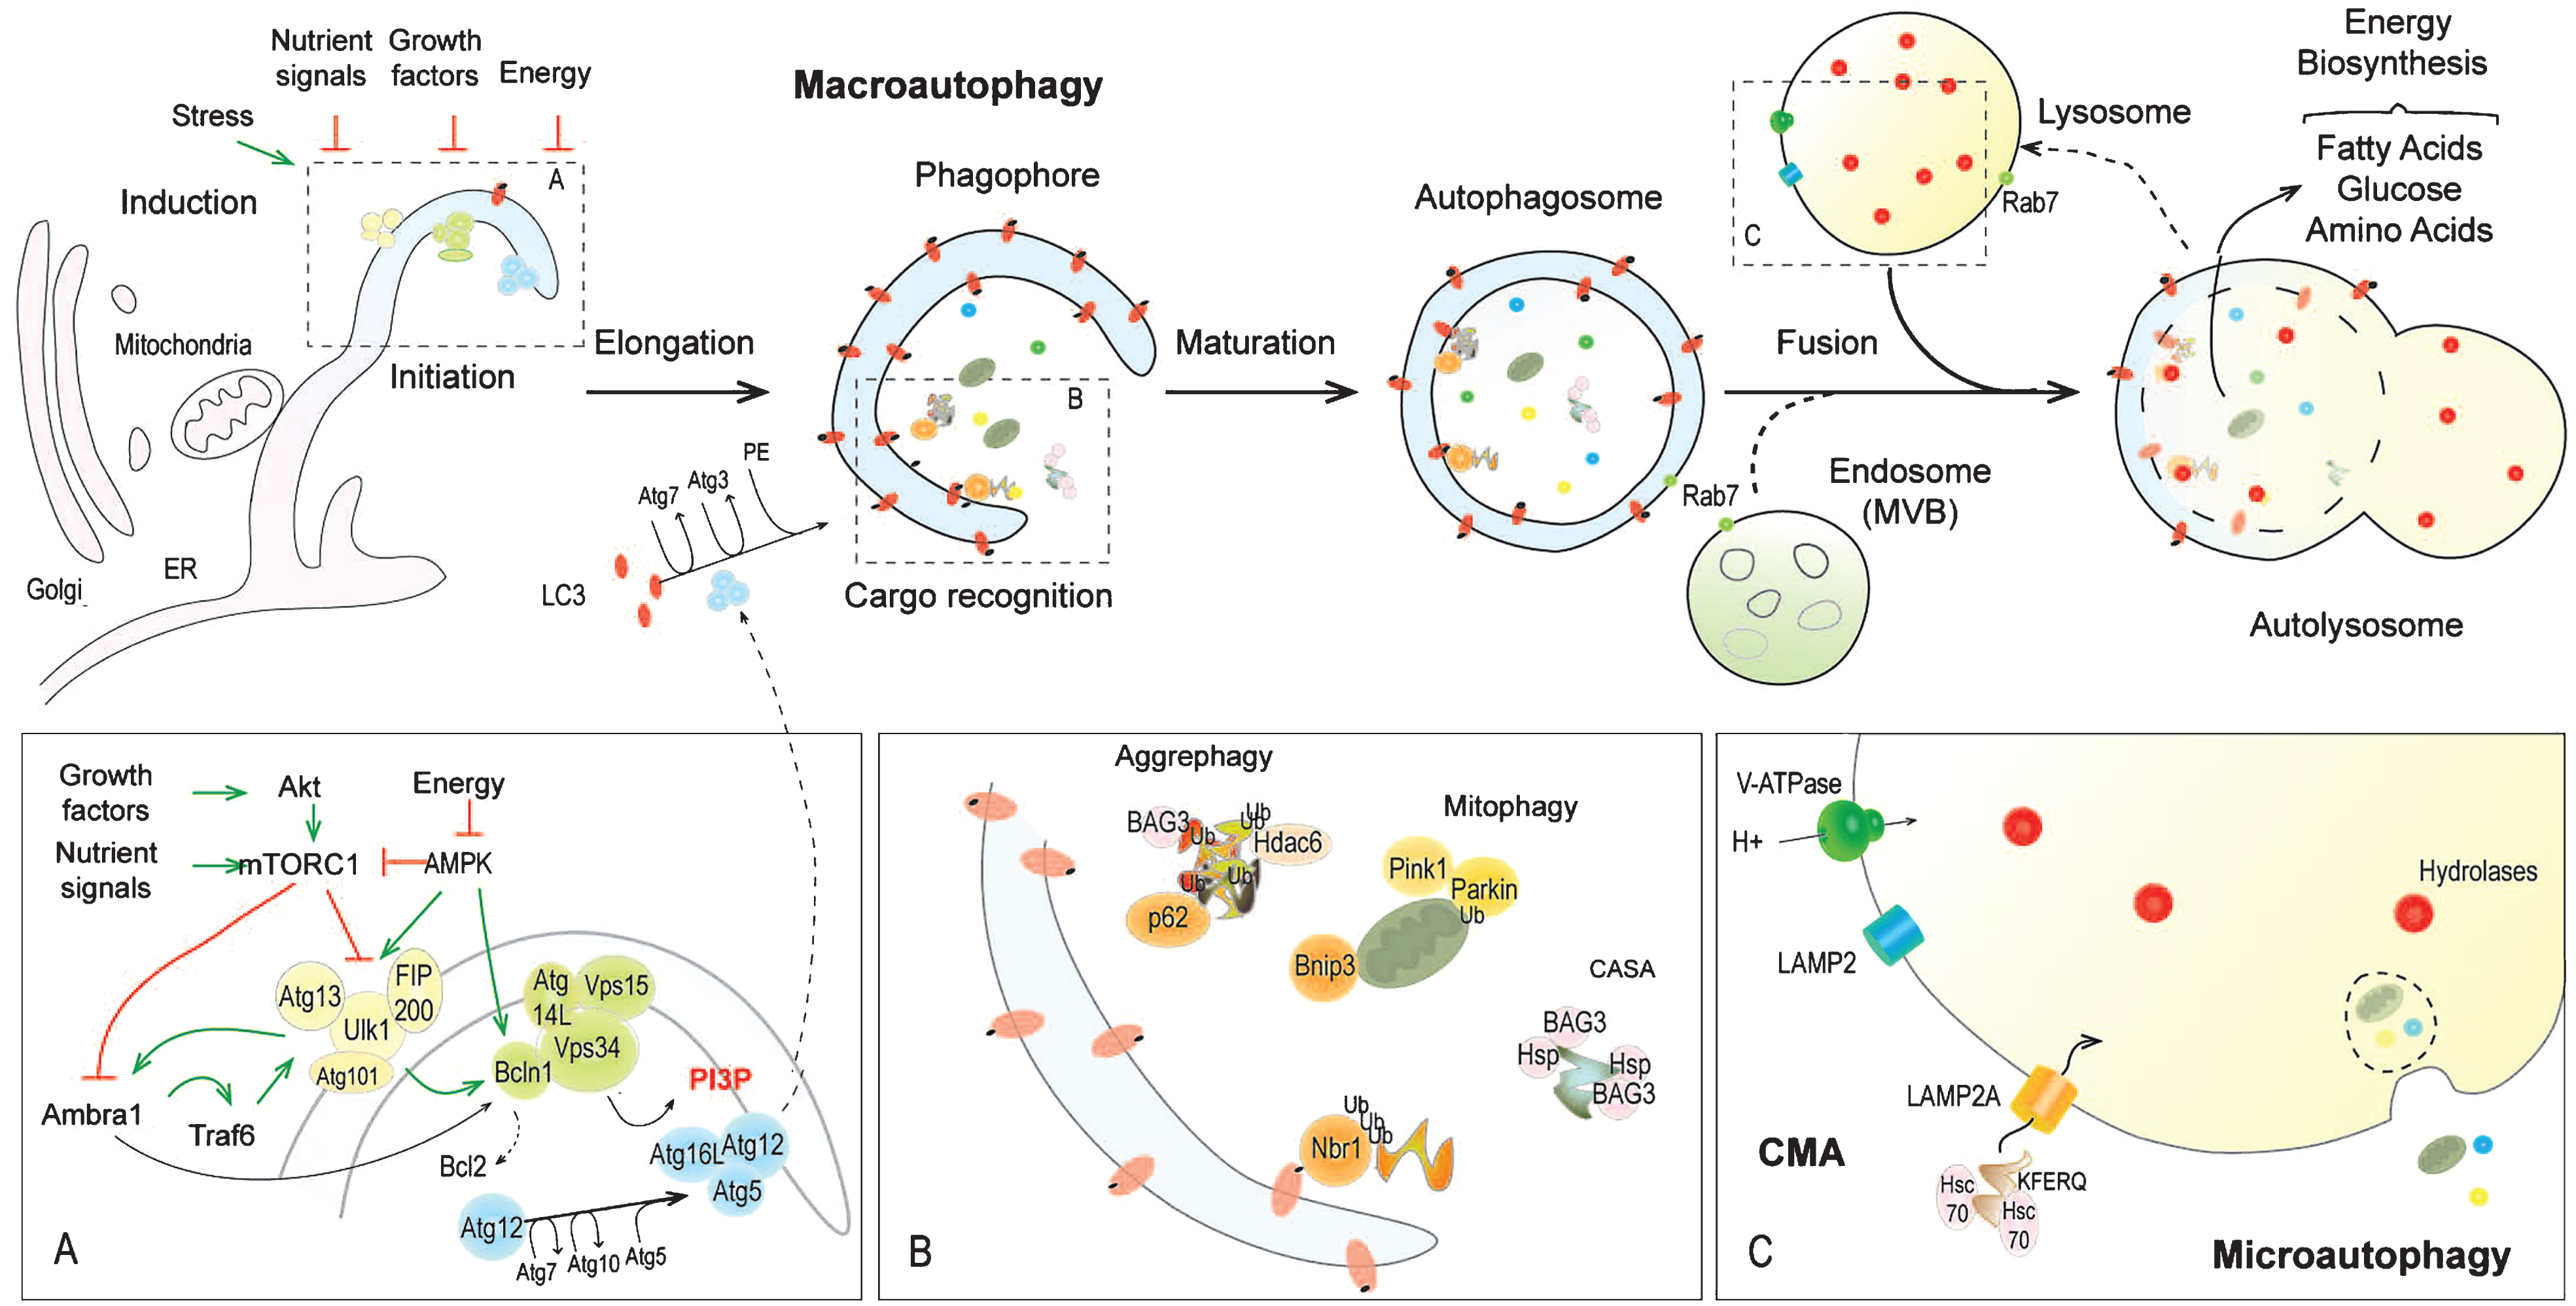 Overview of mechanisms and proteins involved in autophagy in mammals. In (macro)autophagy, initiation leads to the formation of a phagophore, which engulfs large cytoplasmic parts and expands to give rise to autophagosomes. Autophagy induction depends on the balance of several regulatory pathways converging on the Ulk1 complex (A). Autophagy ensures selective degradation of proteins and organelles, mediated by different autophagy cargo receptors (p62, Nbr1) and chaperone/co-chaperone proteins (Hsp, BAG3) (B). After fusion with the lysosomes and/or endosomes, degradation of the autolysosomal content by lysosomal enzymes permits recycling of metabolites. Of note, lysosomes are also involved in degradation associated with microautophagy and chaperone-mediated autophagy (CMA) (C). Red lines represent inhibition; green arrows show activation. Bcln1, Beclin1; MVB, multivesicular bodies; Ub, ubiquitin.